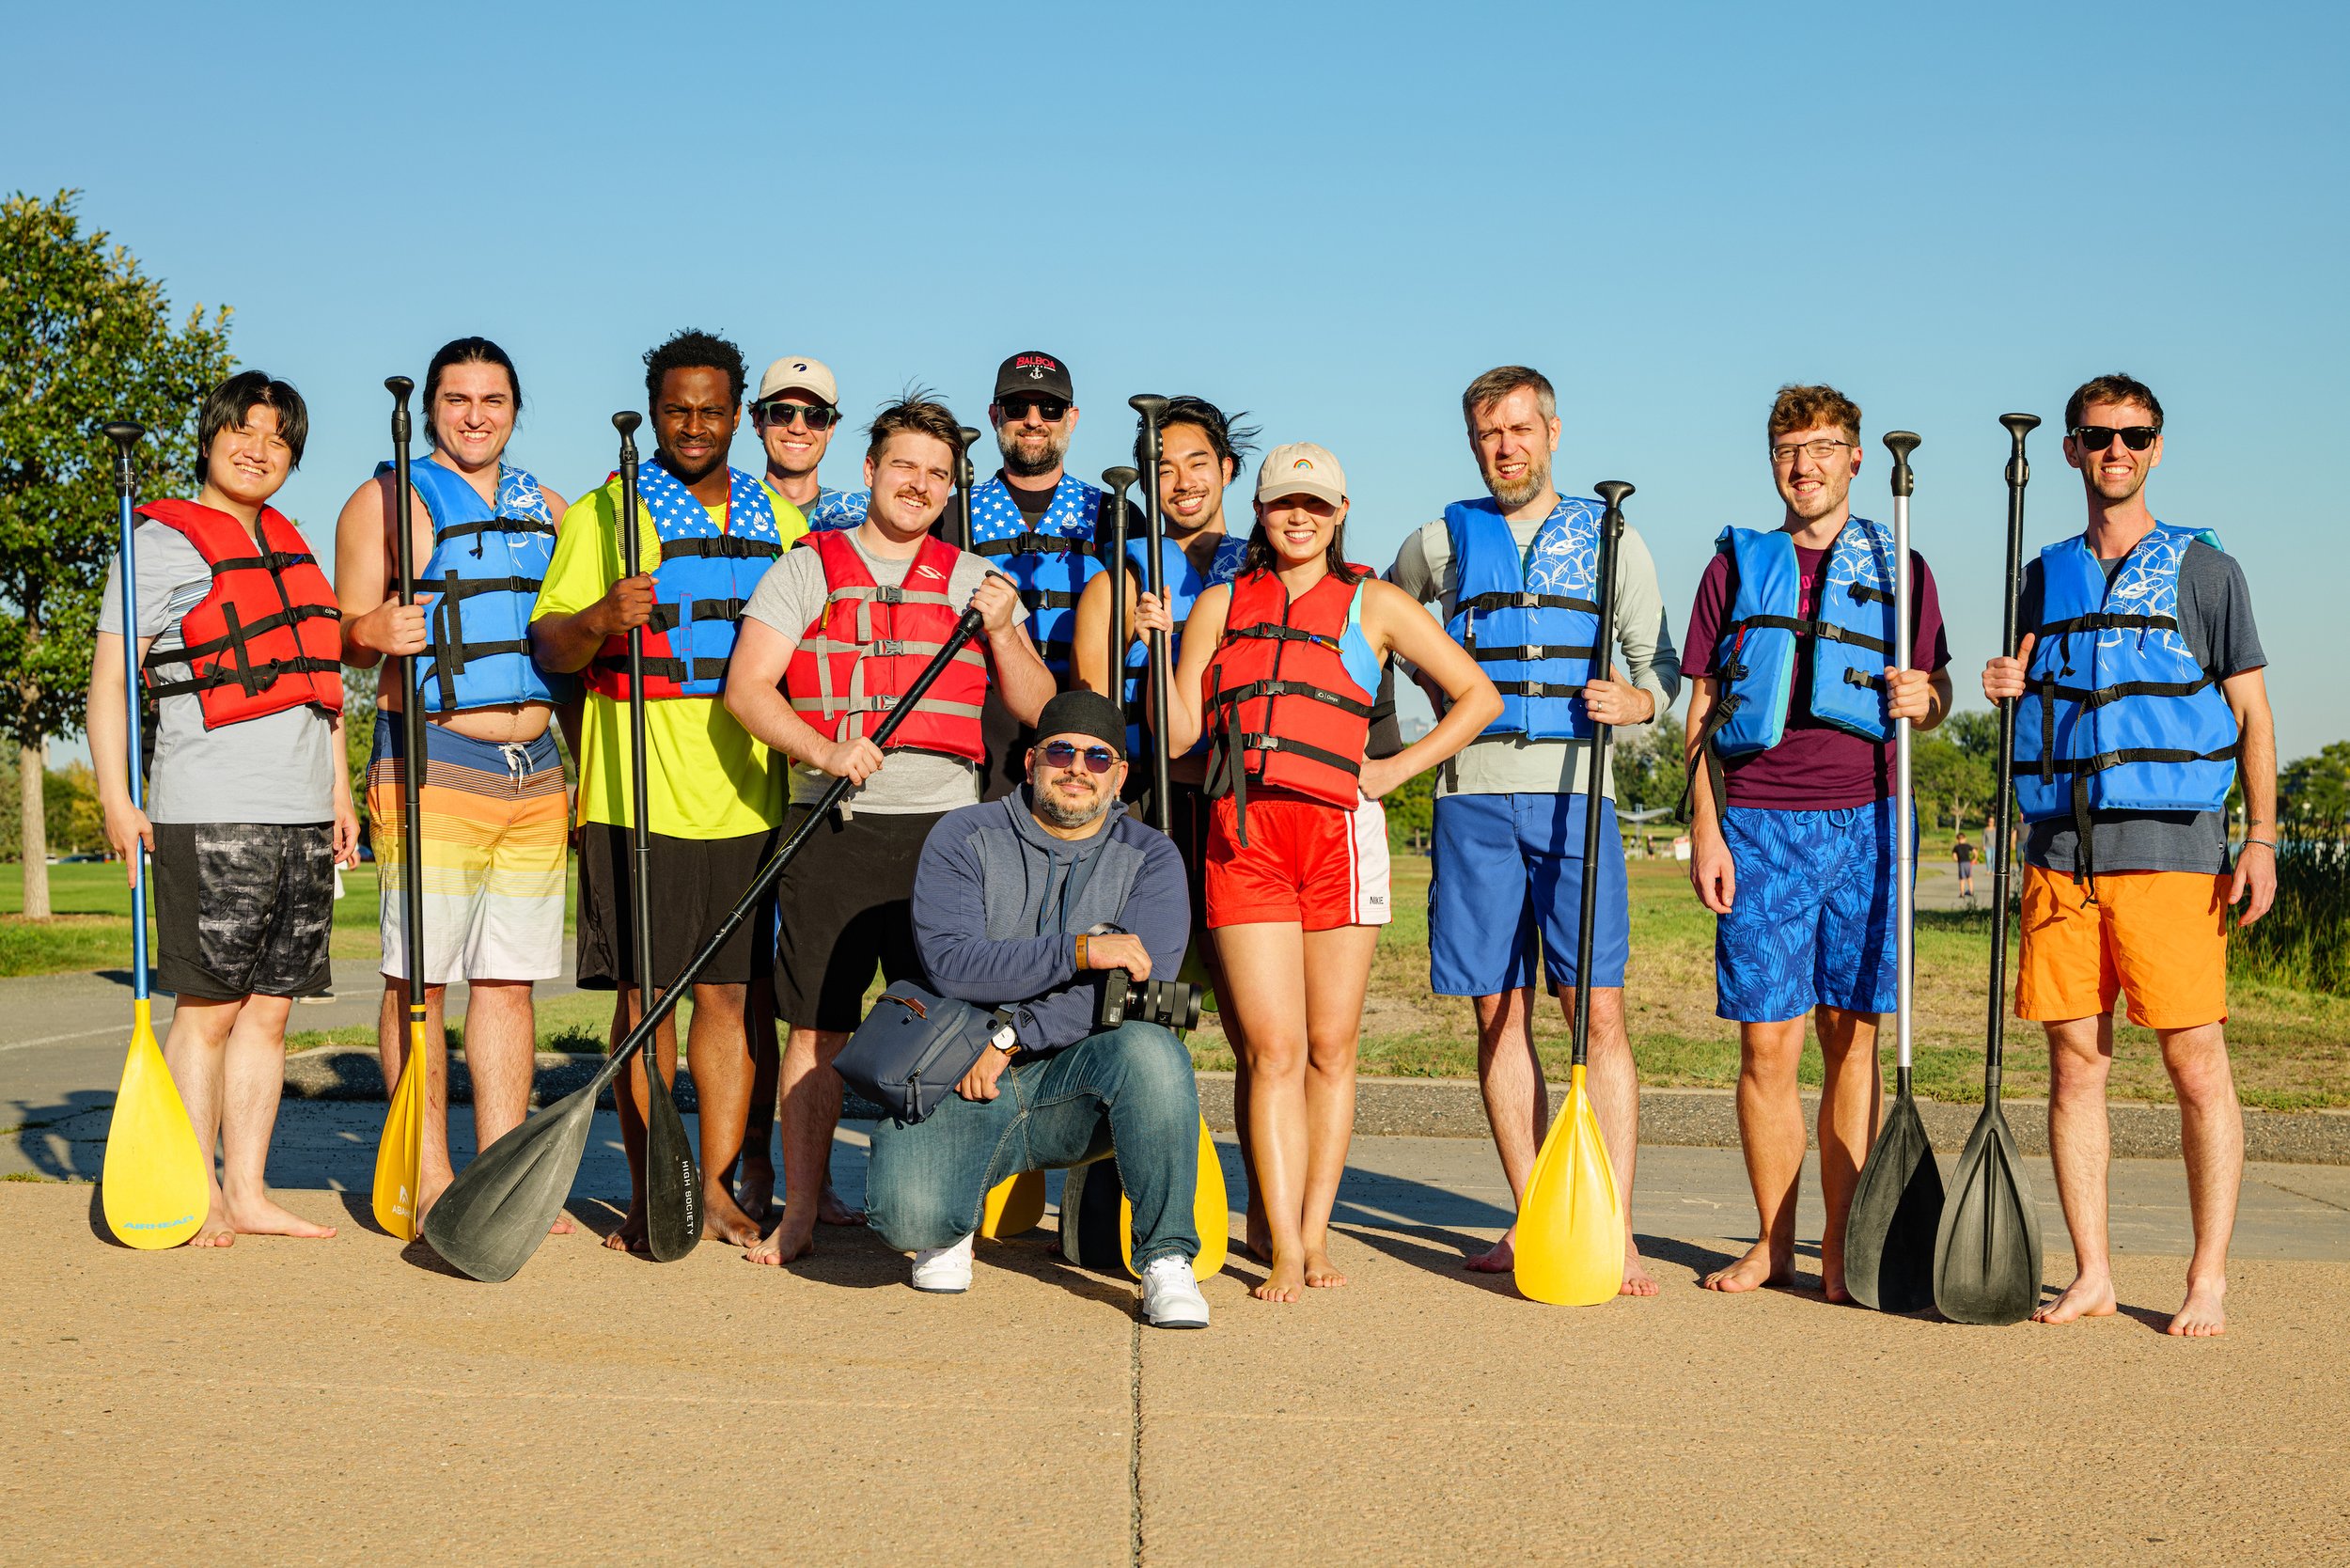 Team gathered for a paddle boarding event